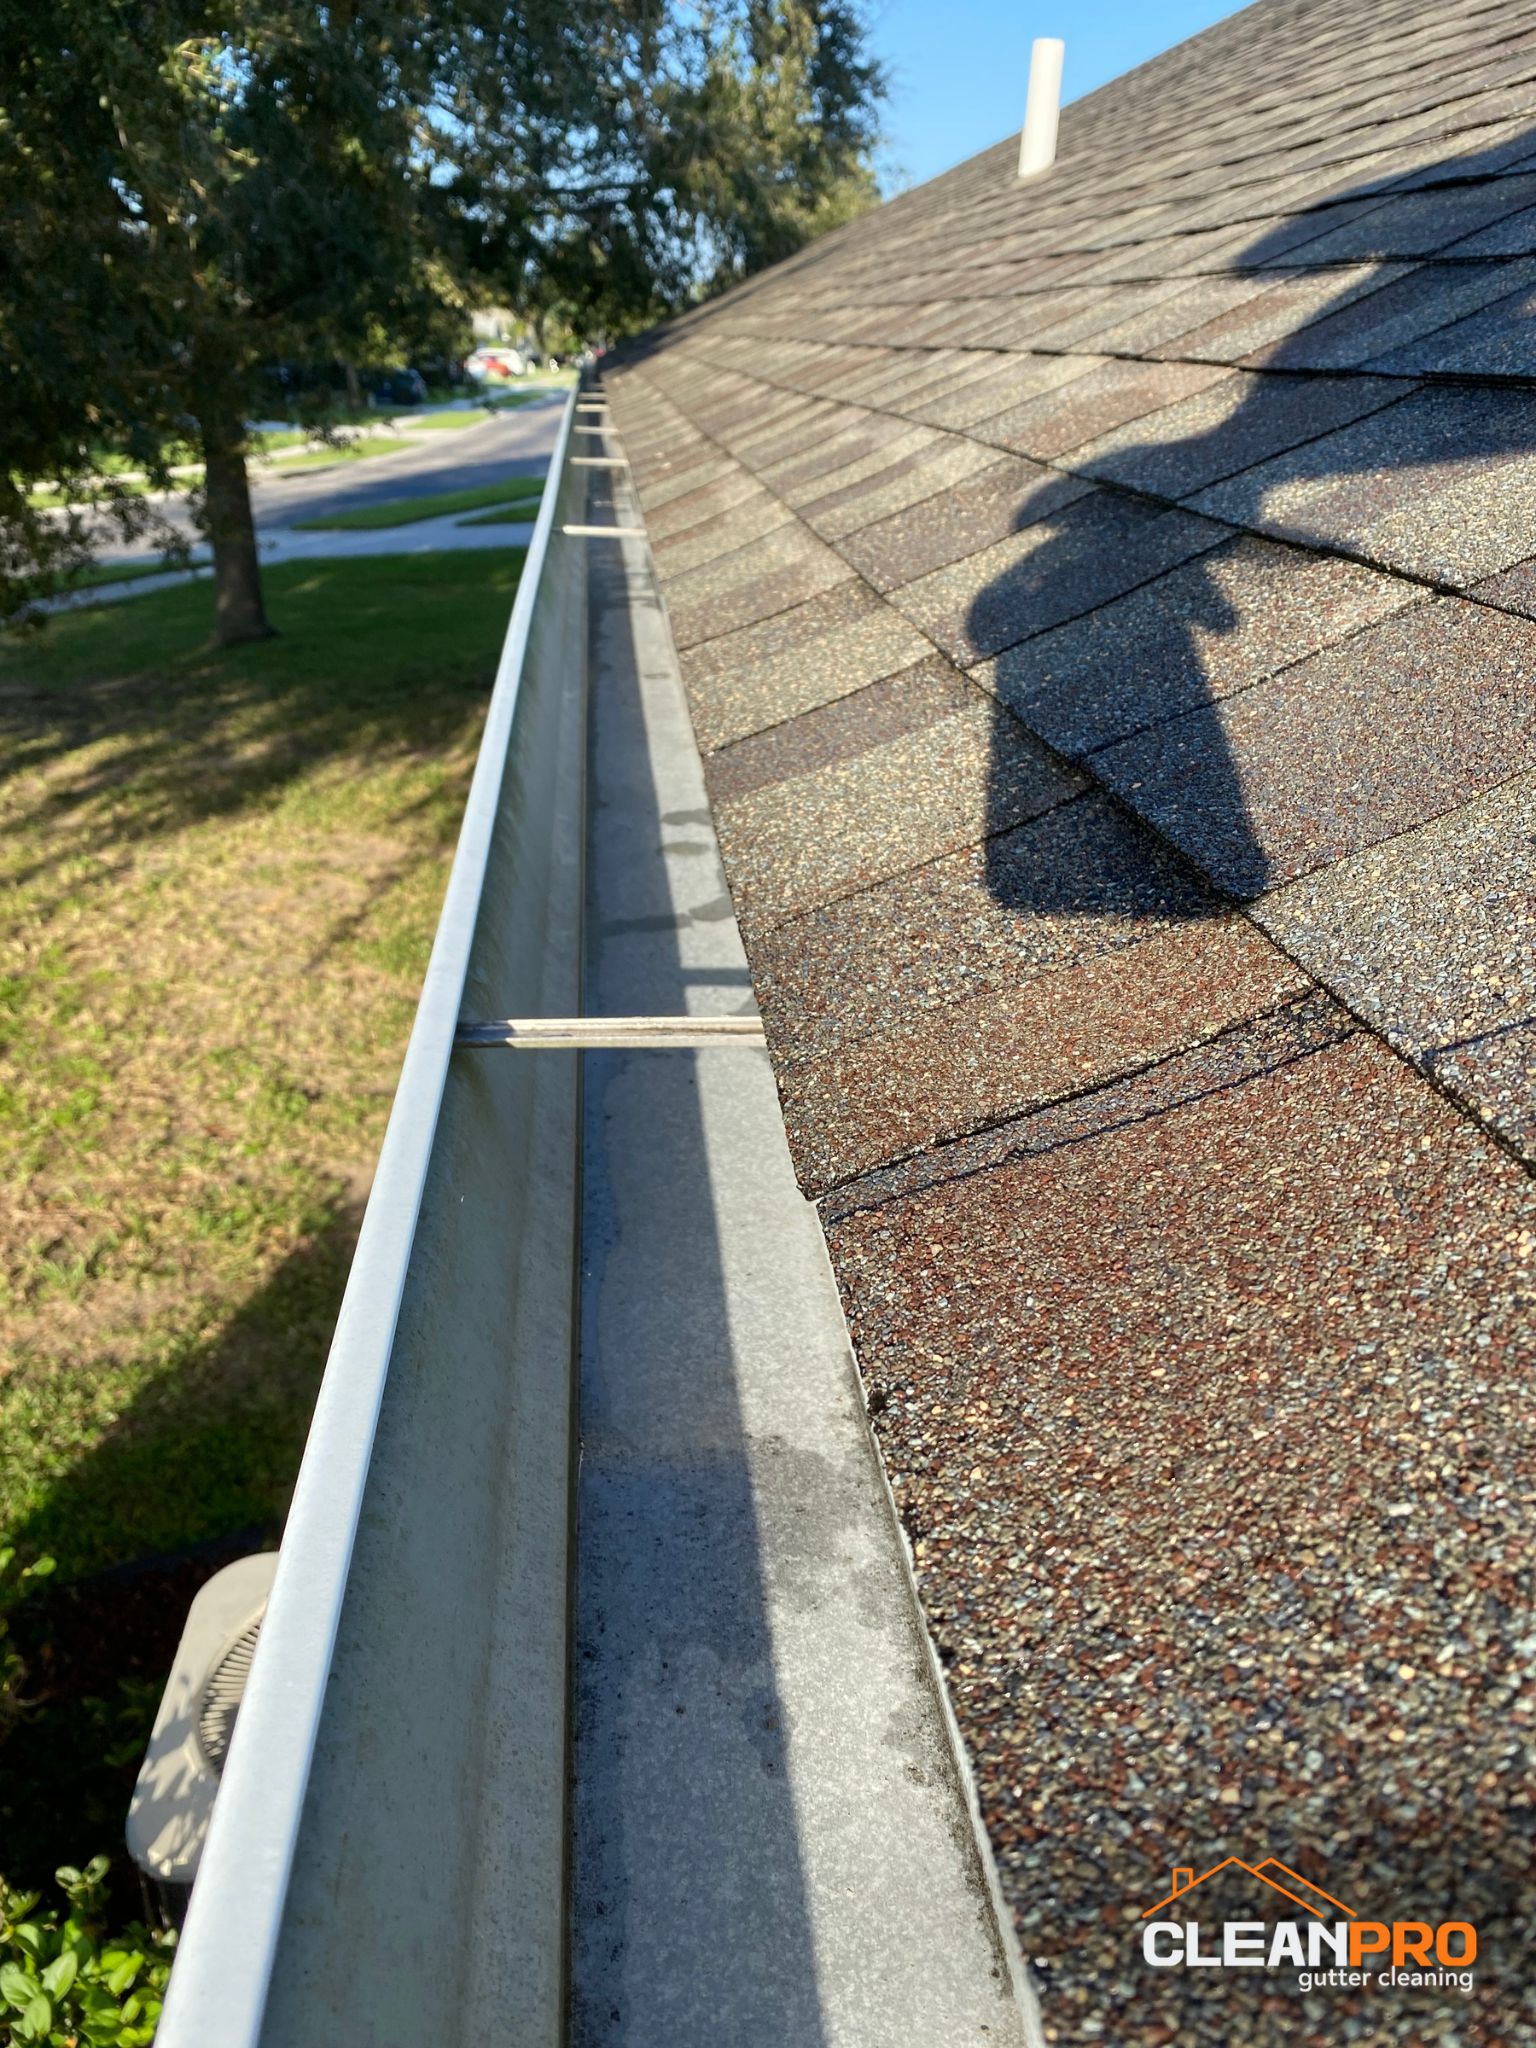 Local Gutter Cleaning in Lilburn